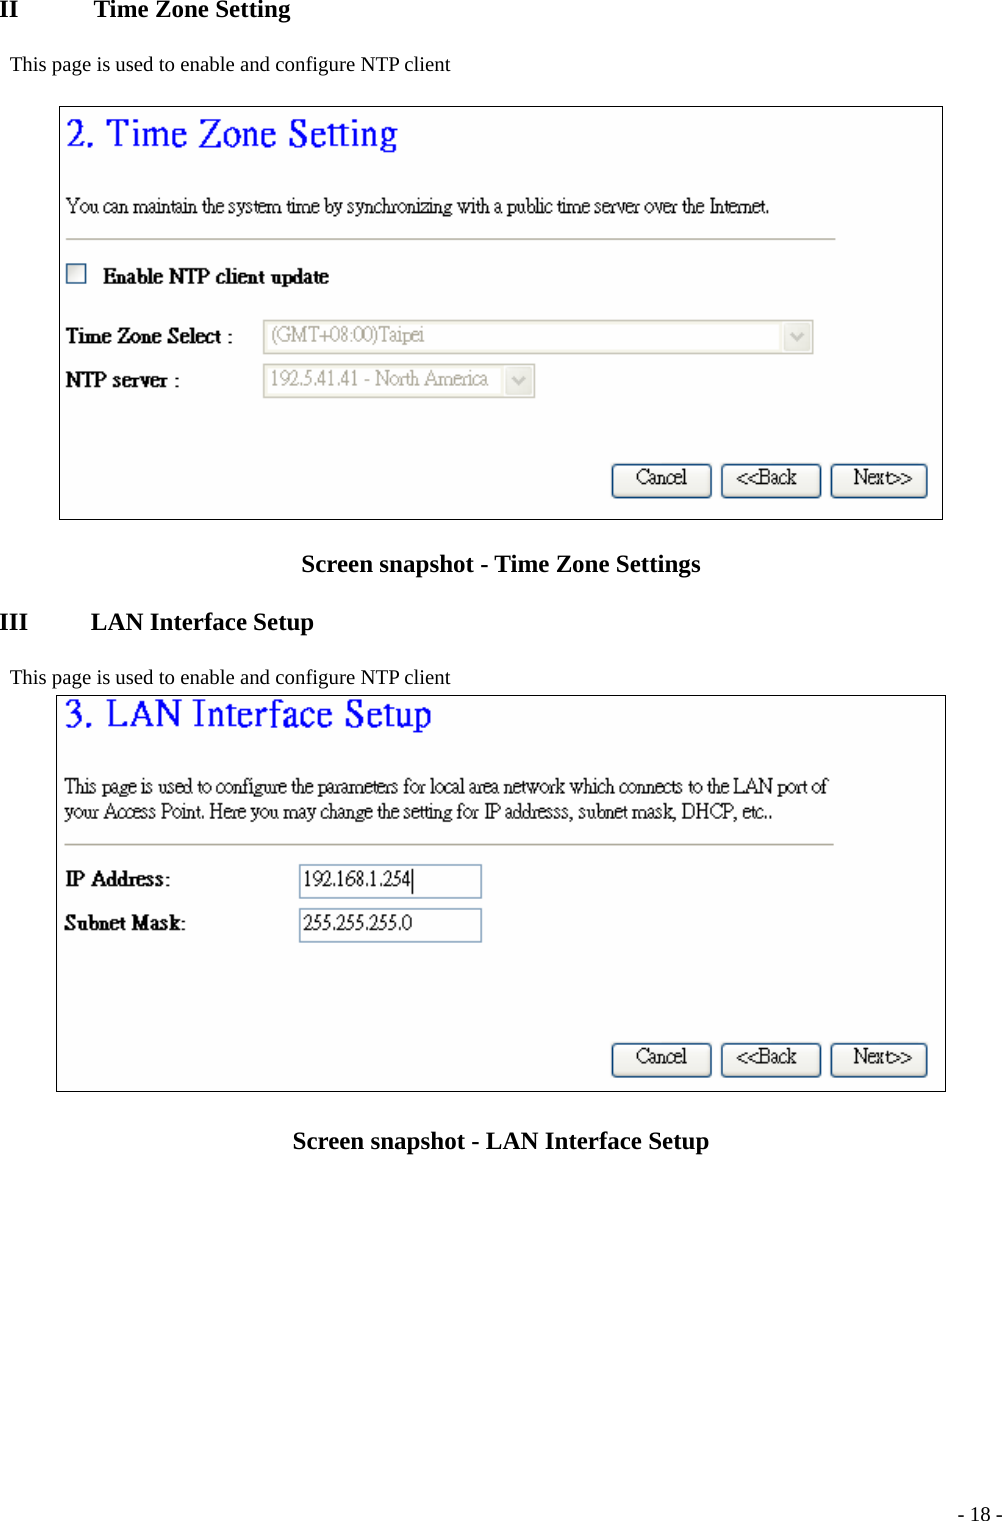 II      Time Zone Setting   This page is used to enable and configure NTP client  Screen snapshot - Time Zone Settings III     LAN Interface Setup   This page is used to enable and configure NTP client  Screen snapshot - LAN Interface Setup   - 18 -